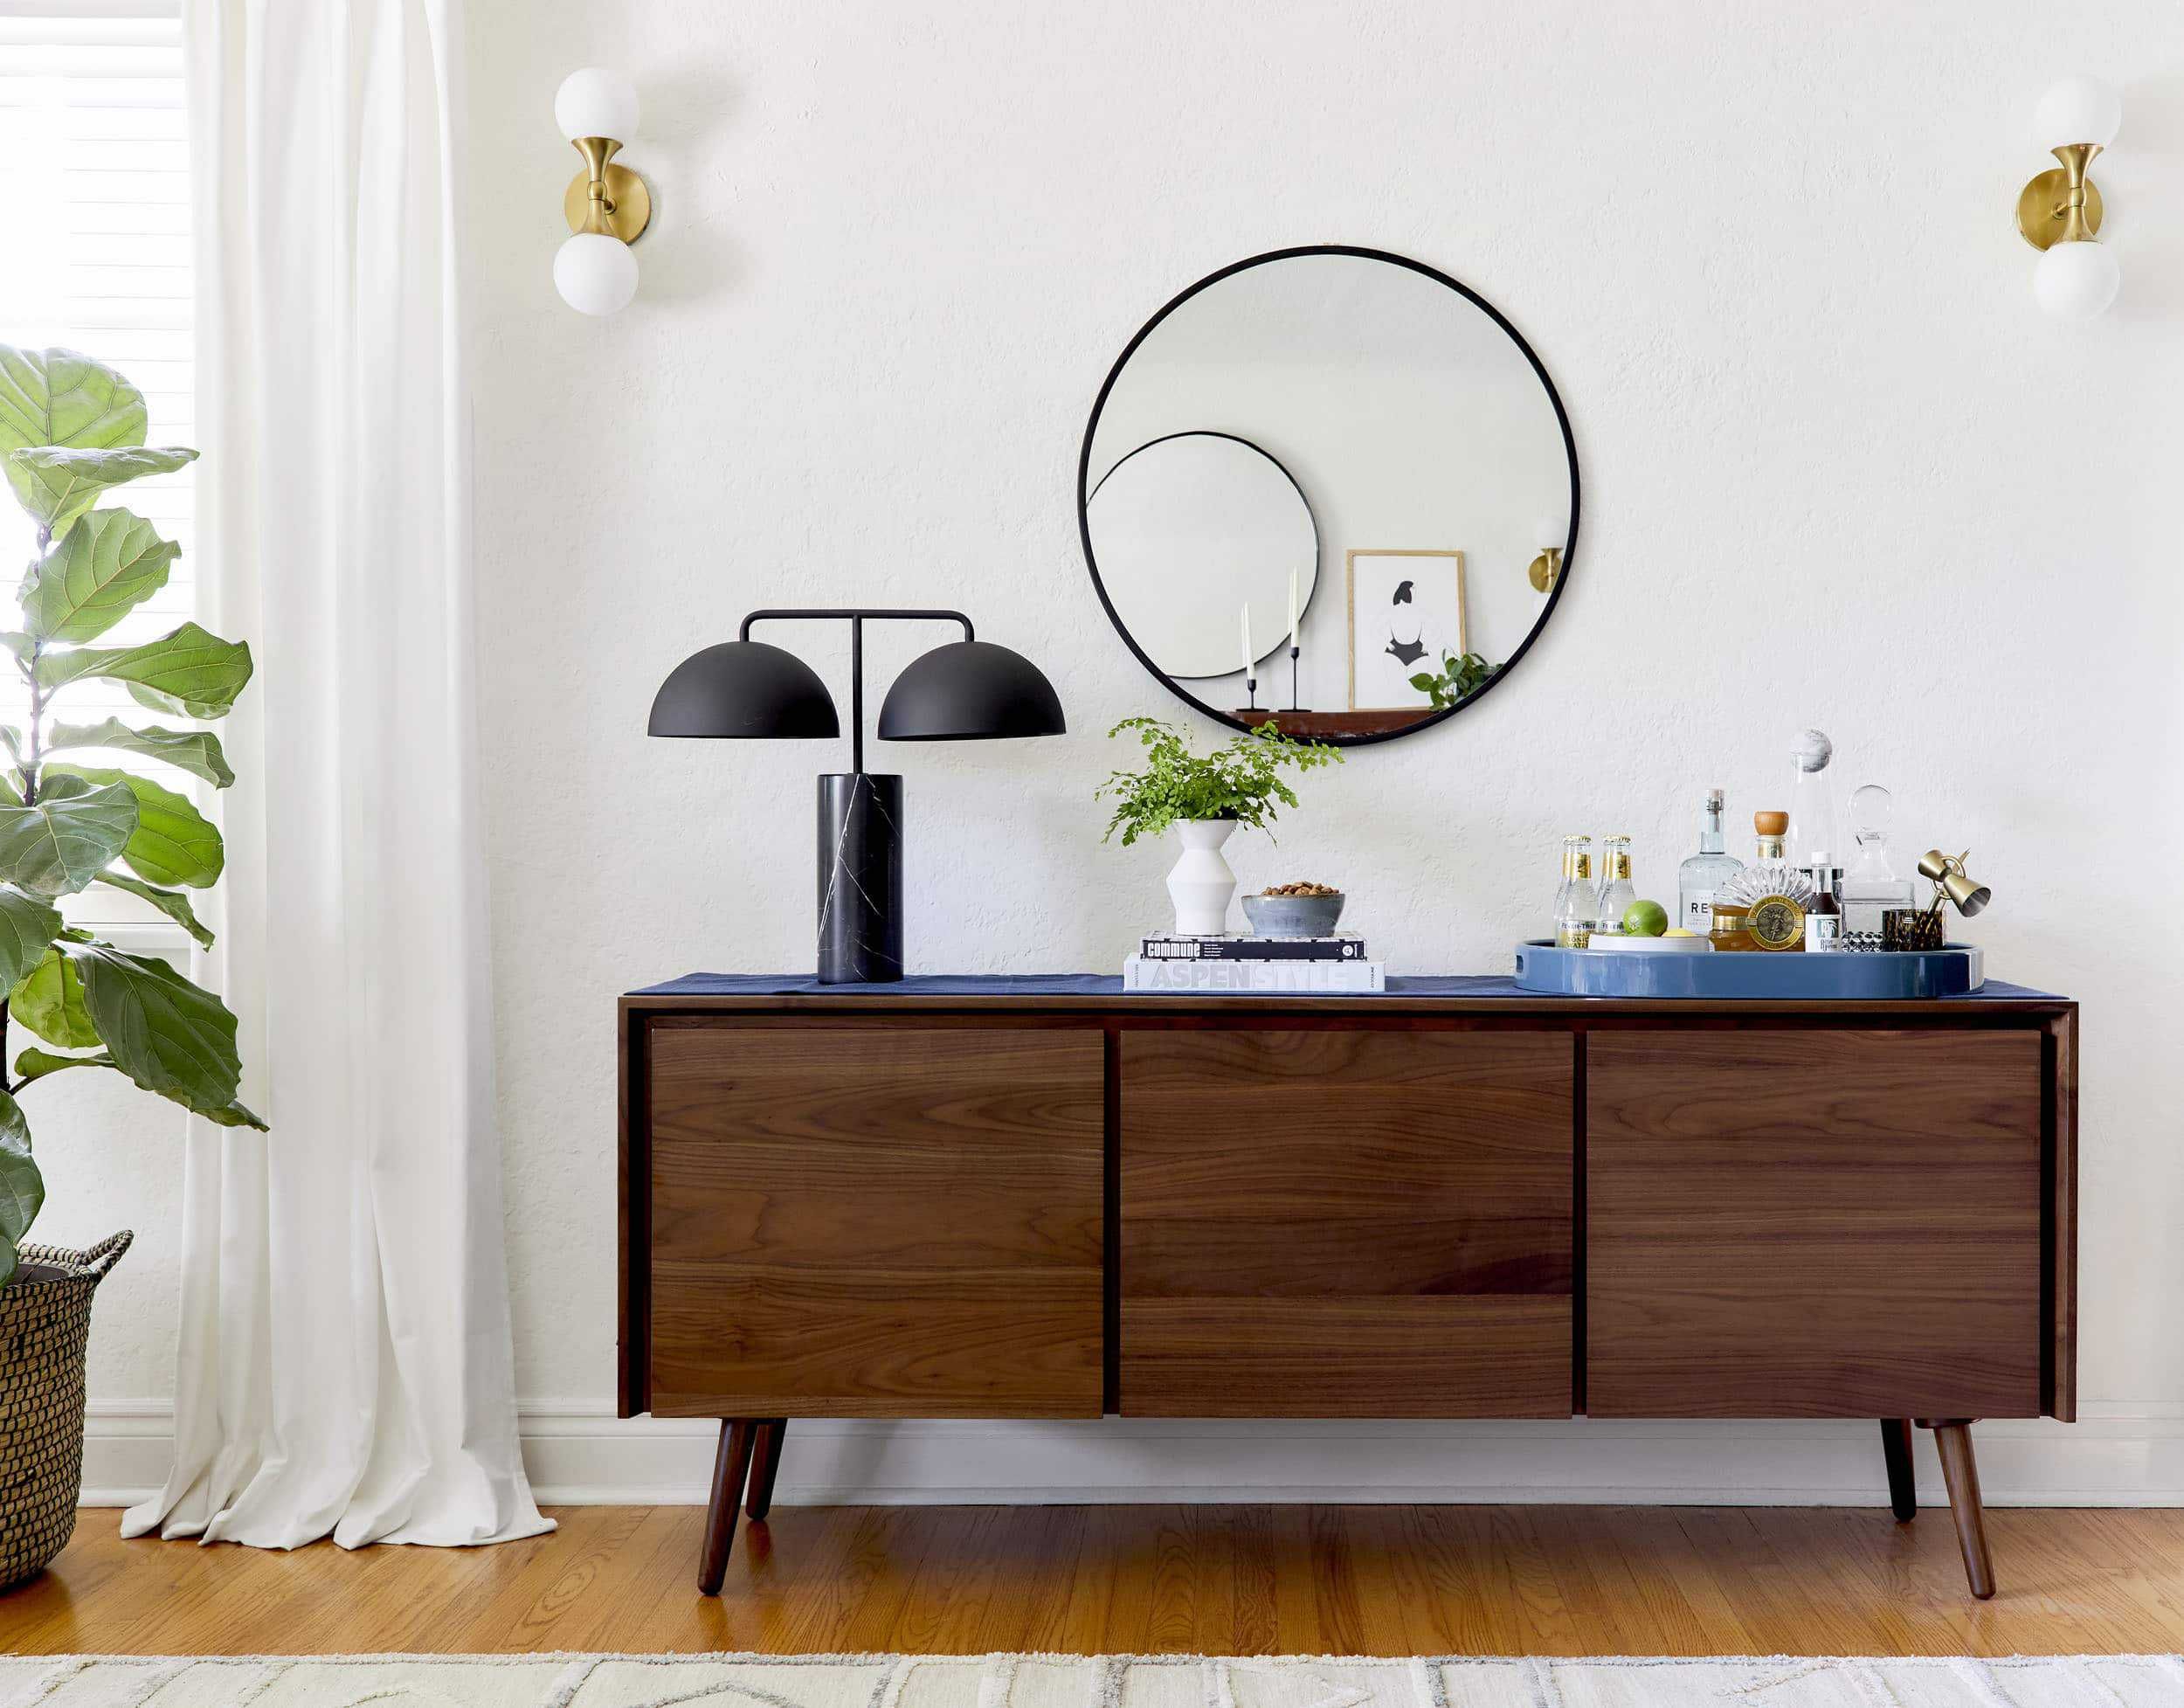 4 Ways To Style That Credenza For "real Life" + Shop Our Favorite Credenzas  – Emily Henderson For Most Current Credenzas For Living Room (View 11 of 15)